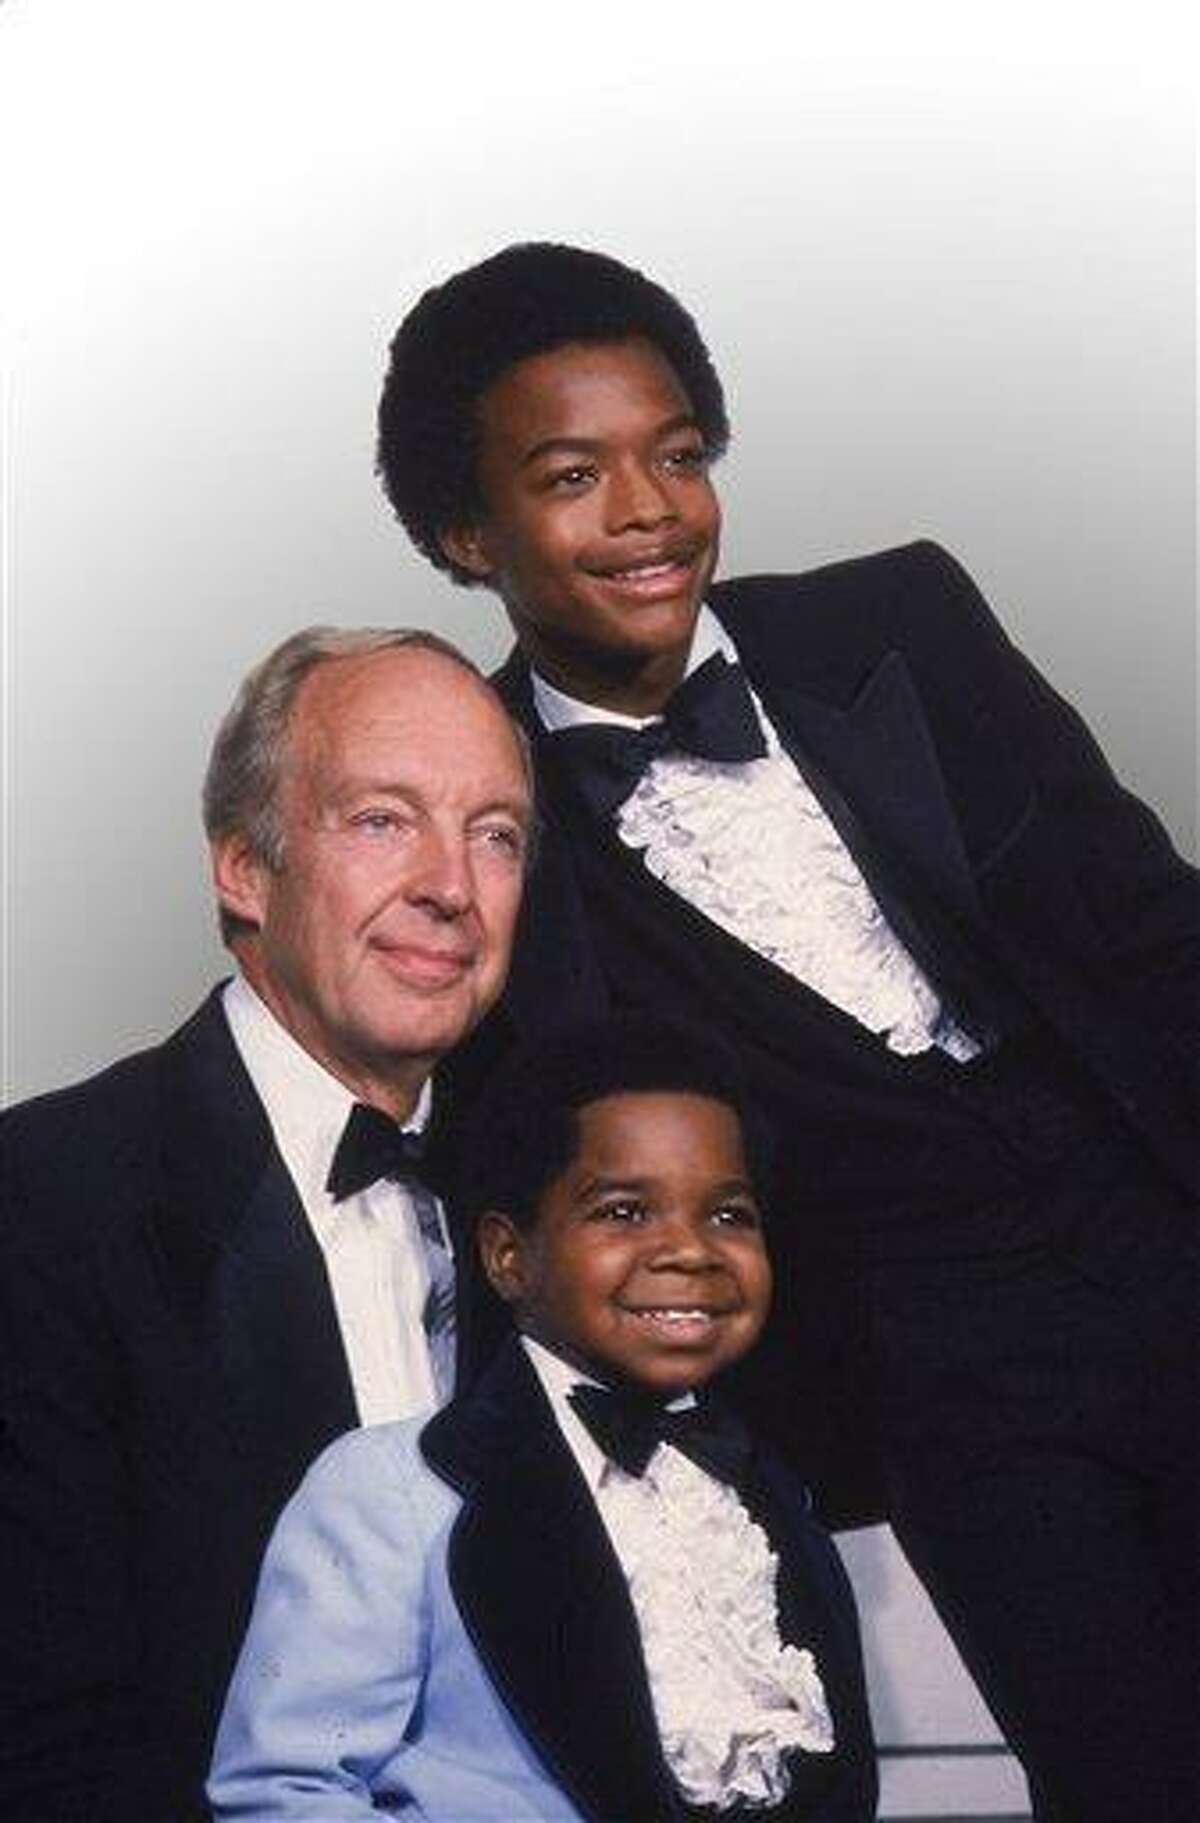 FILE - This Sept. 13, 1981 file photo shows stars of the television show "Different Strokes," clockwise from foreground, Gary Coleman, Conrad Bain and Todd Bridges at the Emmy Awards in Los Angeles. Bain, who starred as the kindly white adoptive father of two young African-American brothers in the TV sitcom "Diff'rent Strokes," died of natural causes, Monday, Jan. 14, 2013, at his home in Livermore, Calif. He was 89. (AP Photo, file)